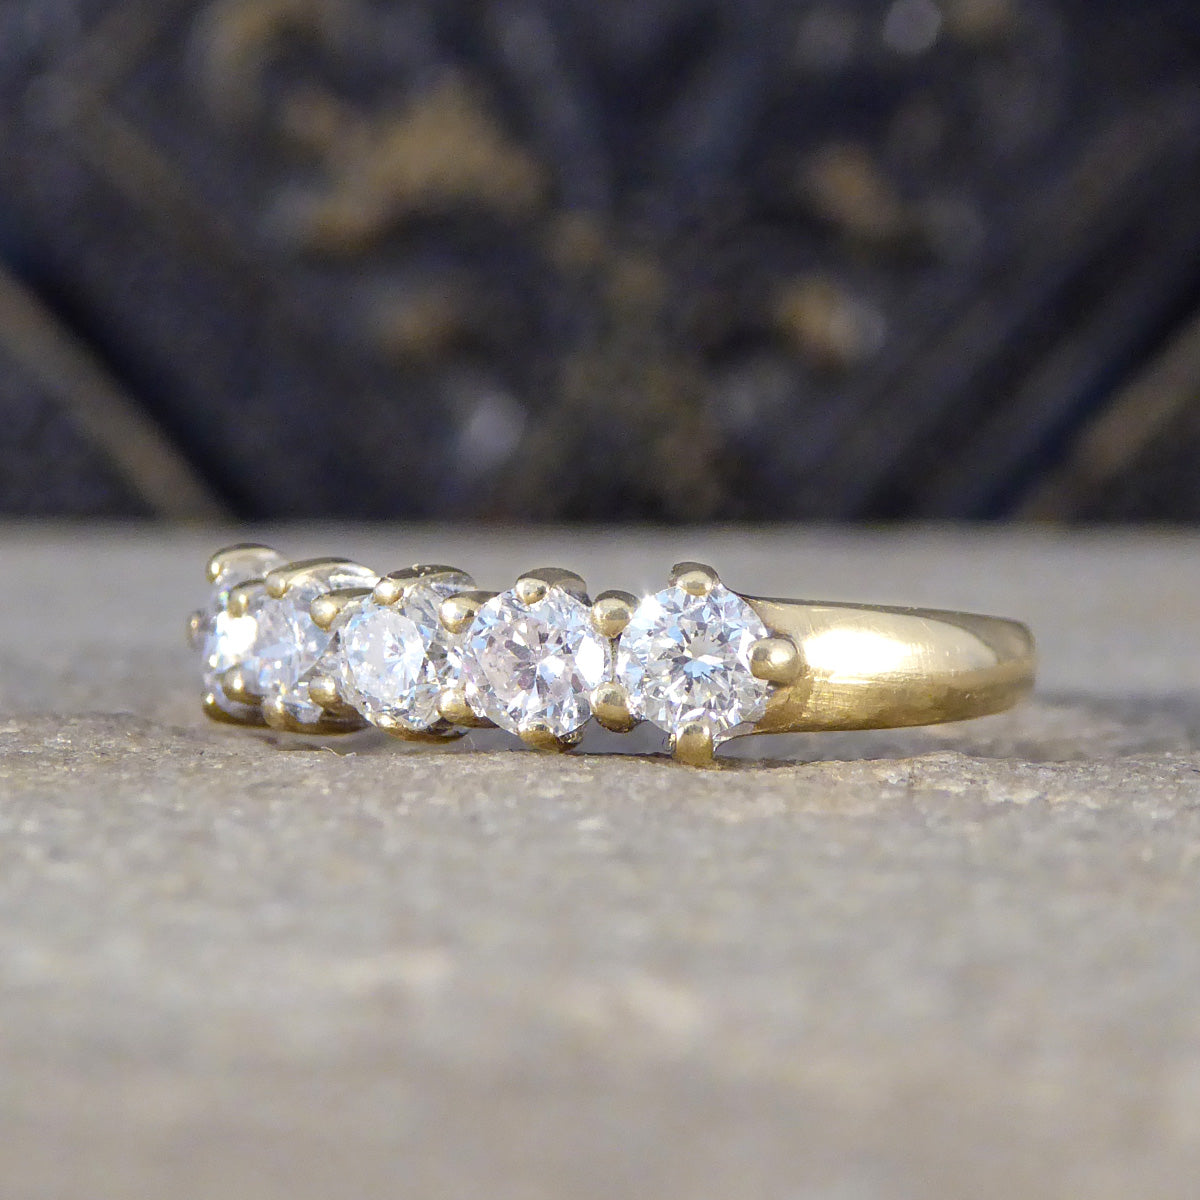 Vintage Five Stone Diamond Ring in 18ct Yellow Gold